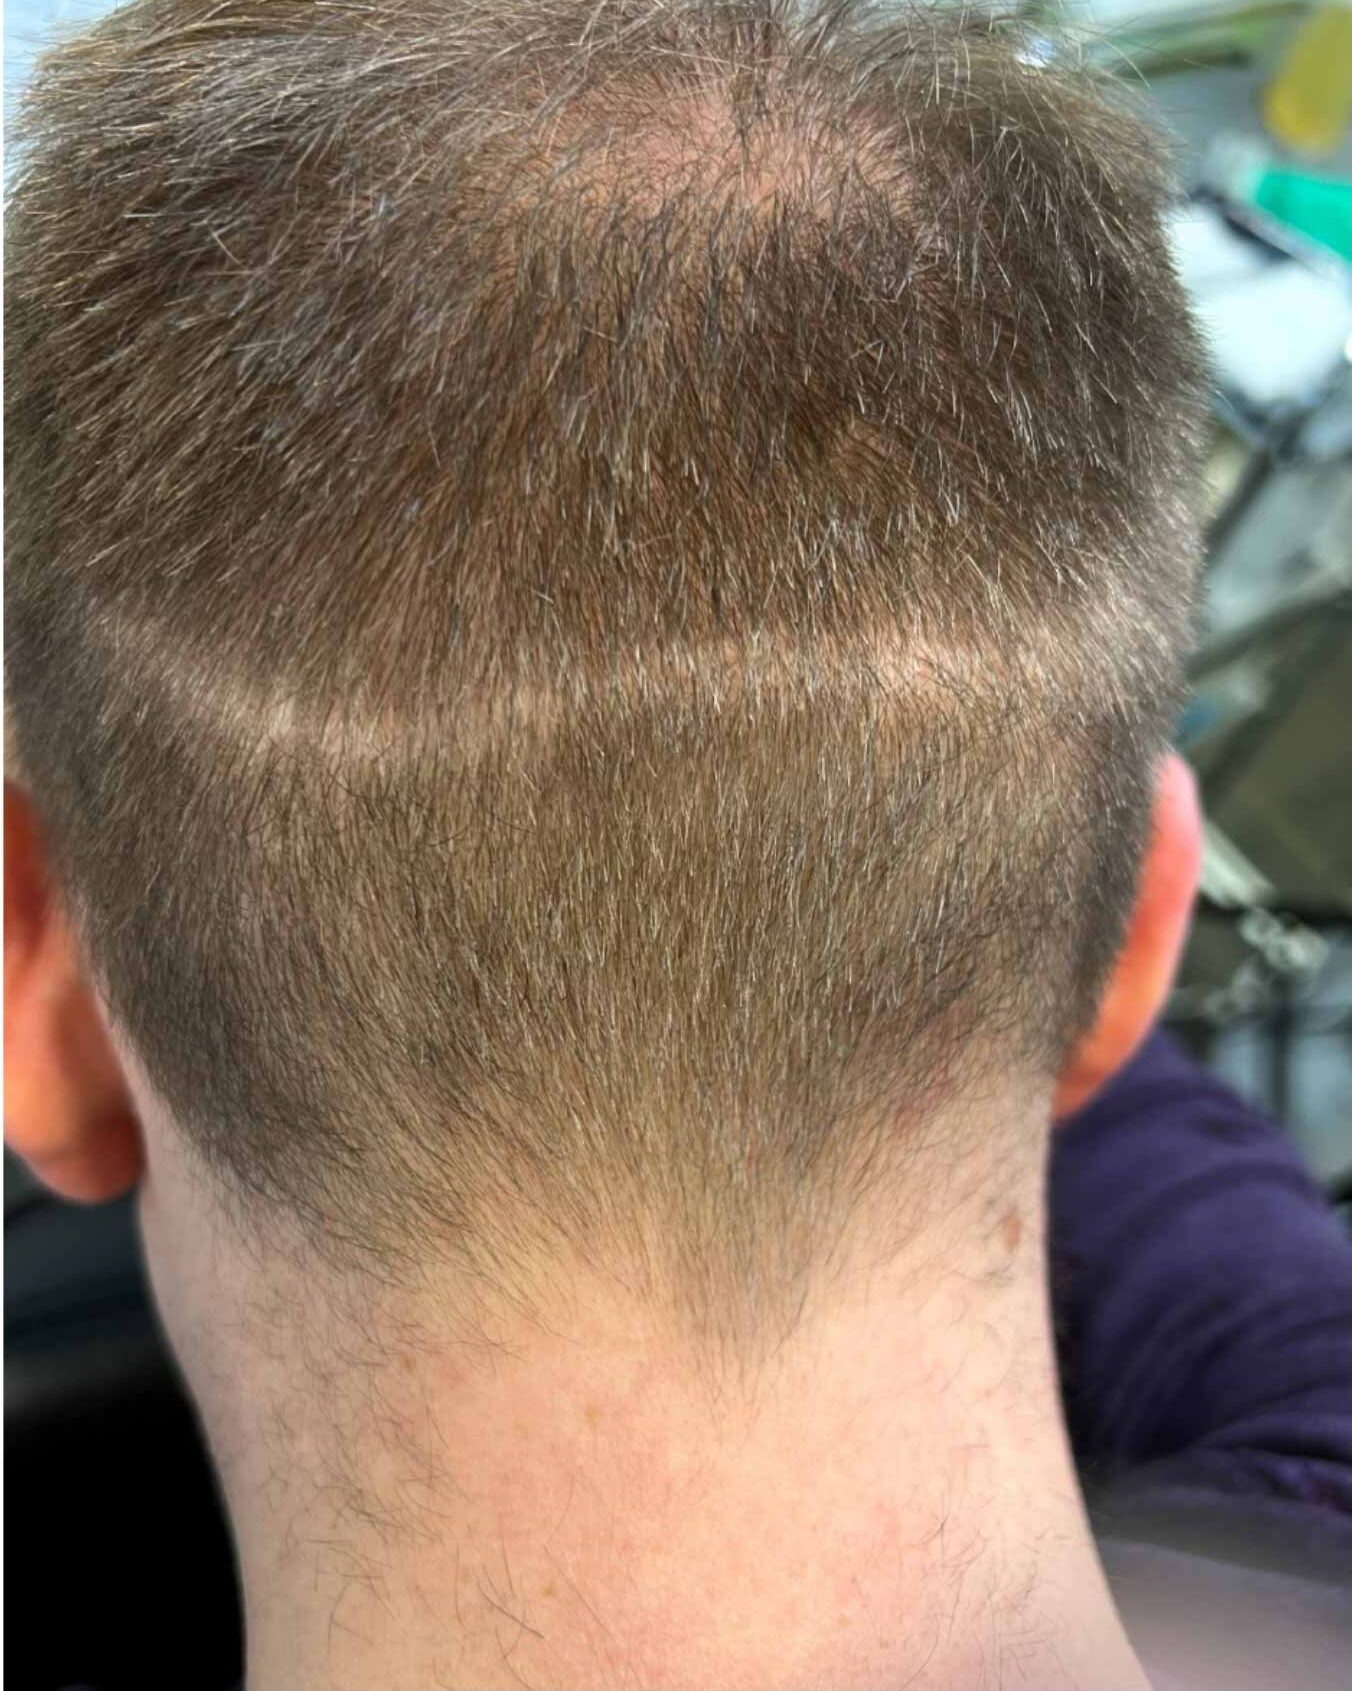 FUT Hair Transplant scar camouflage. Cosmetic and Mediical Tattoo by Dasha. Permanent makeup and reconstructive tattoo, scalp micro-pigmentation in Christchurch, New Zealand